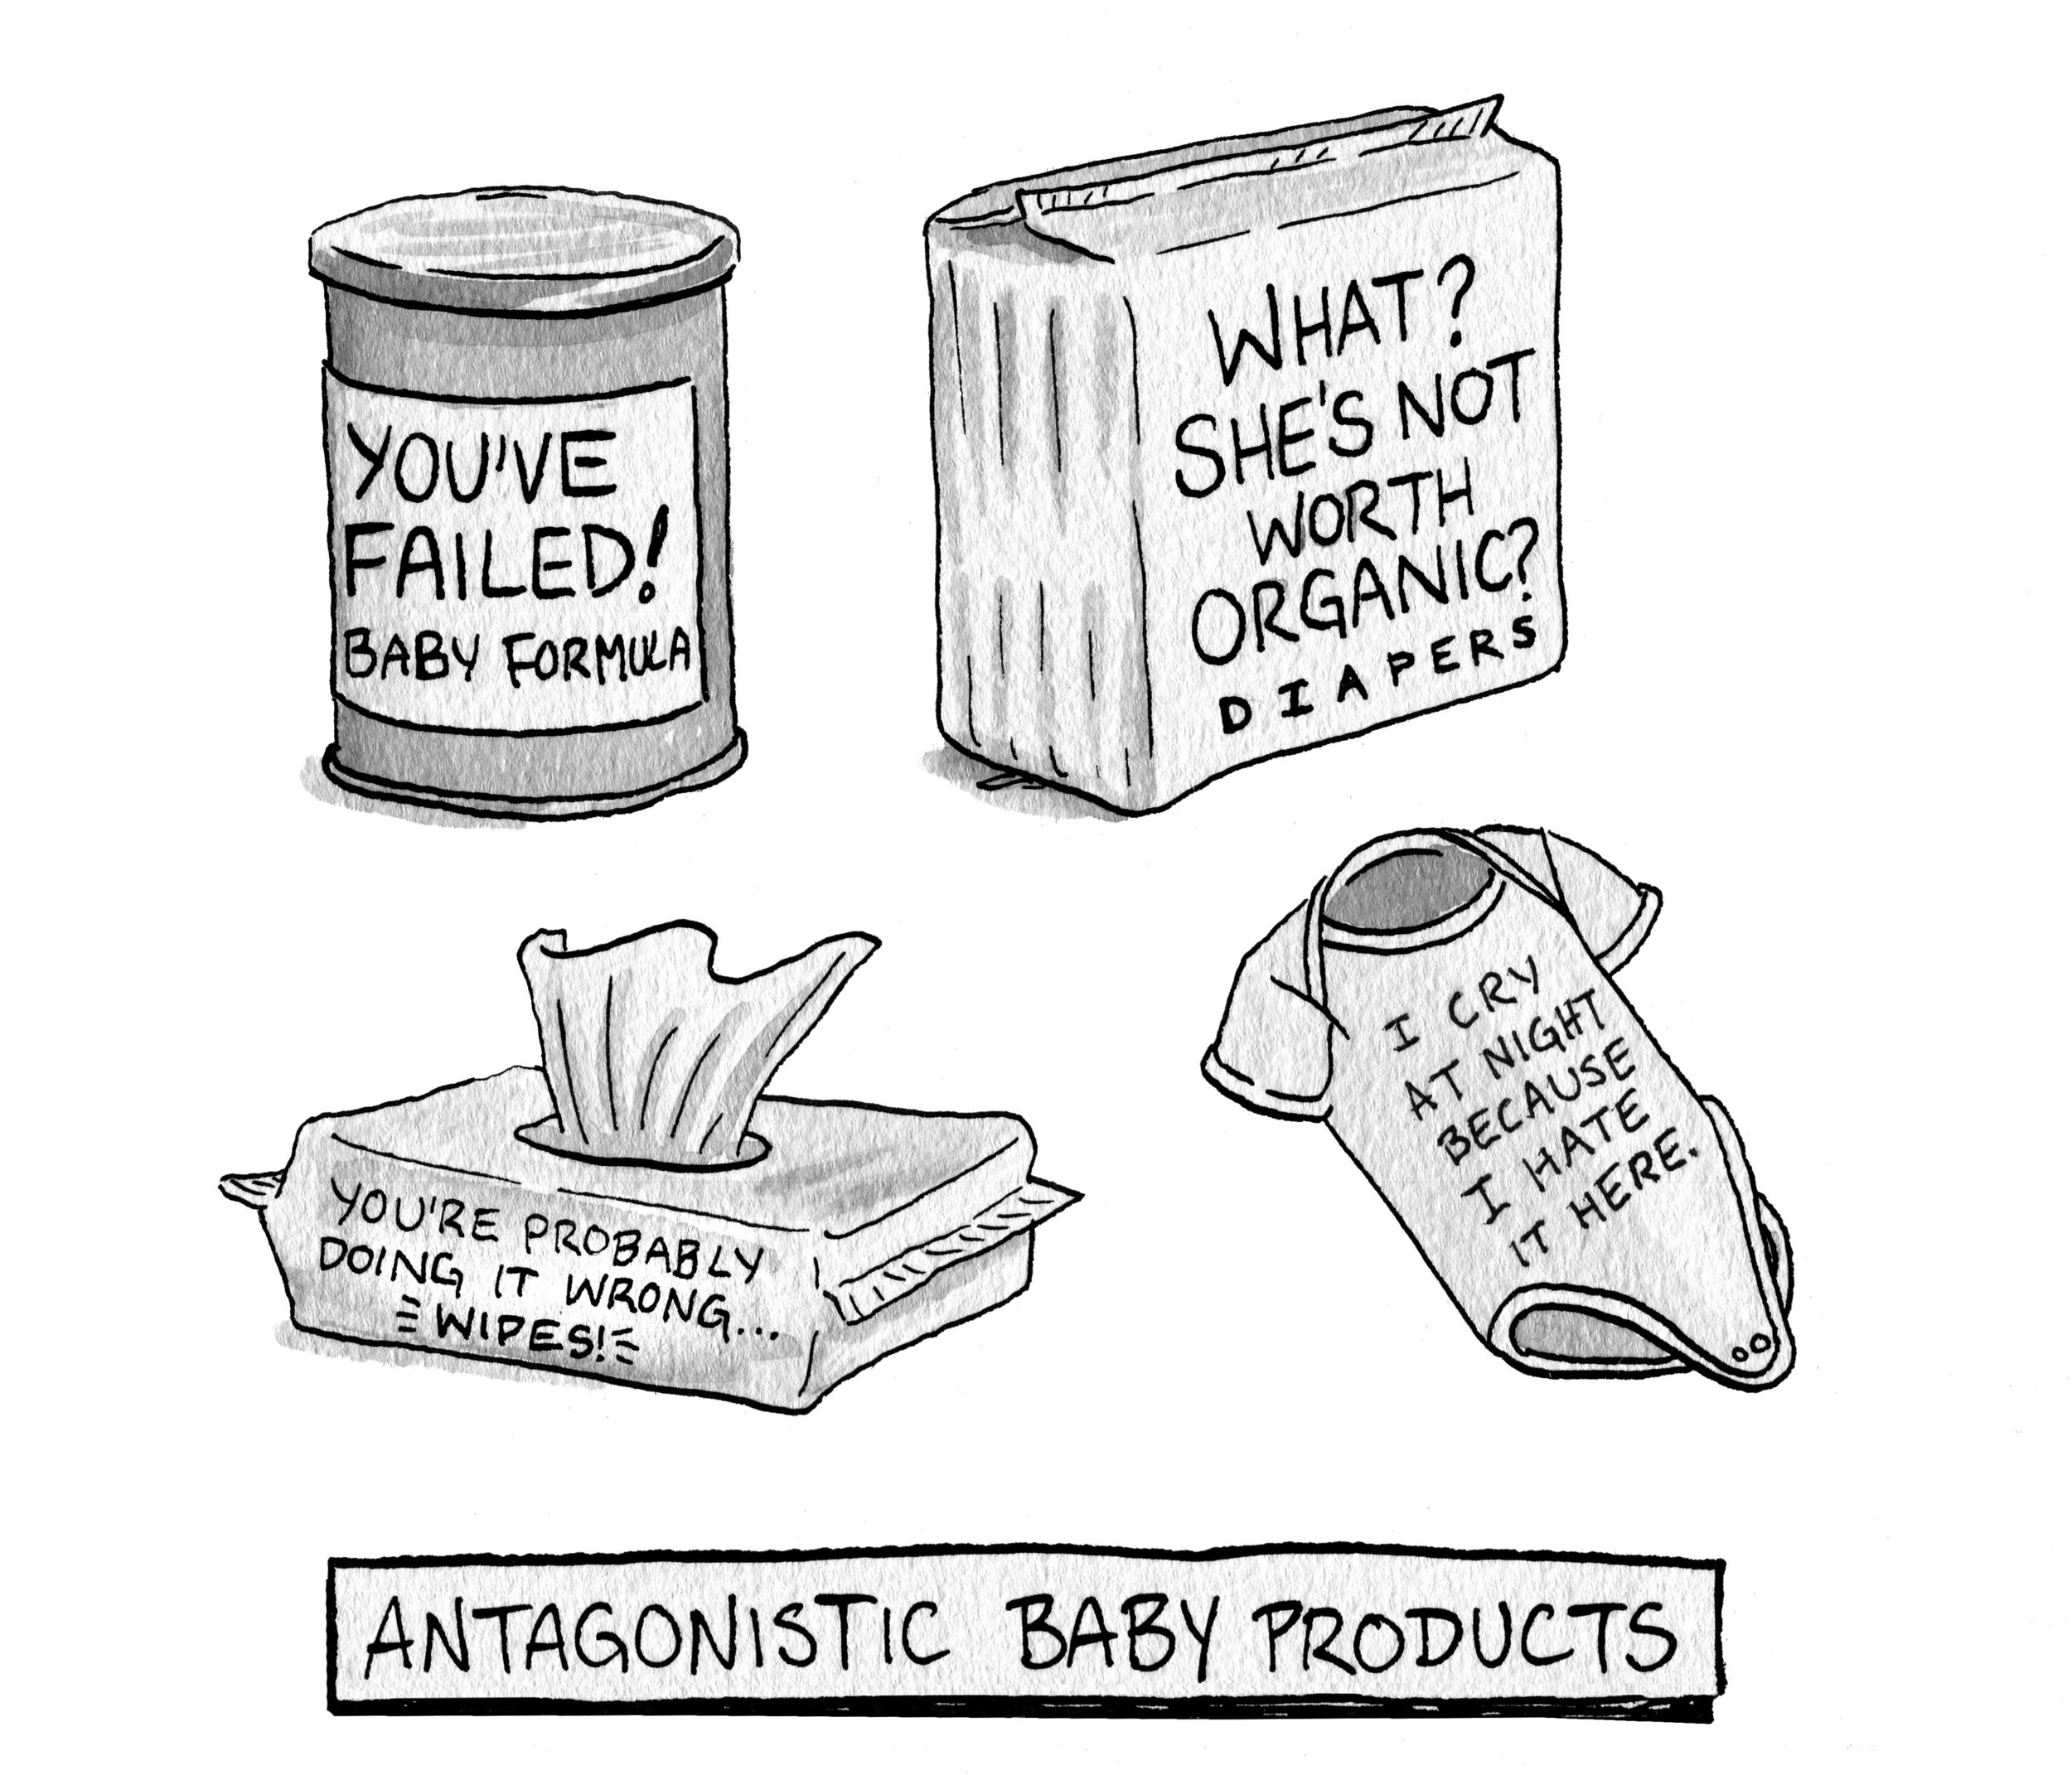   The New Yorker,  April 23, 2018   https://condenaststore.com/featured/antagonistic-baby-products-sophia-wiedeman.html  